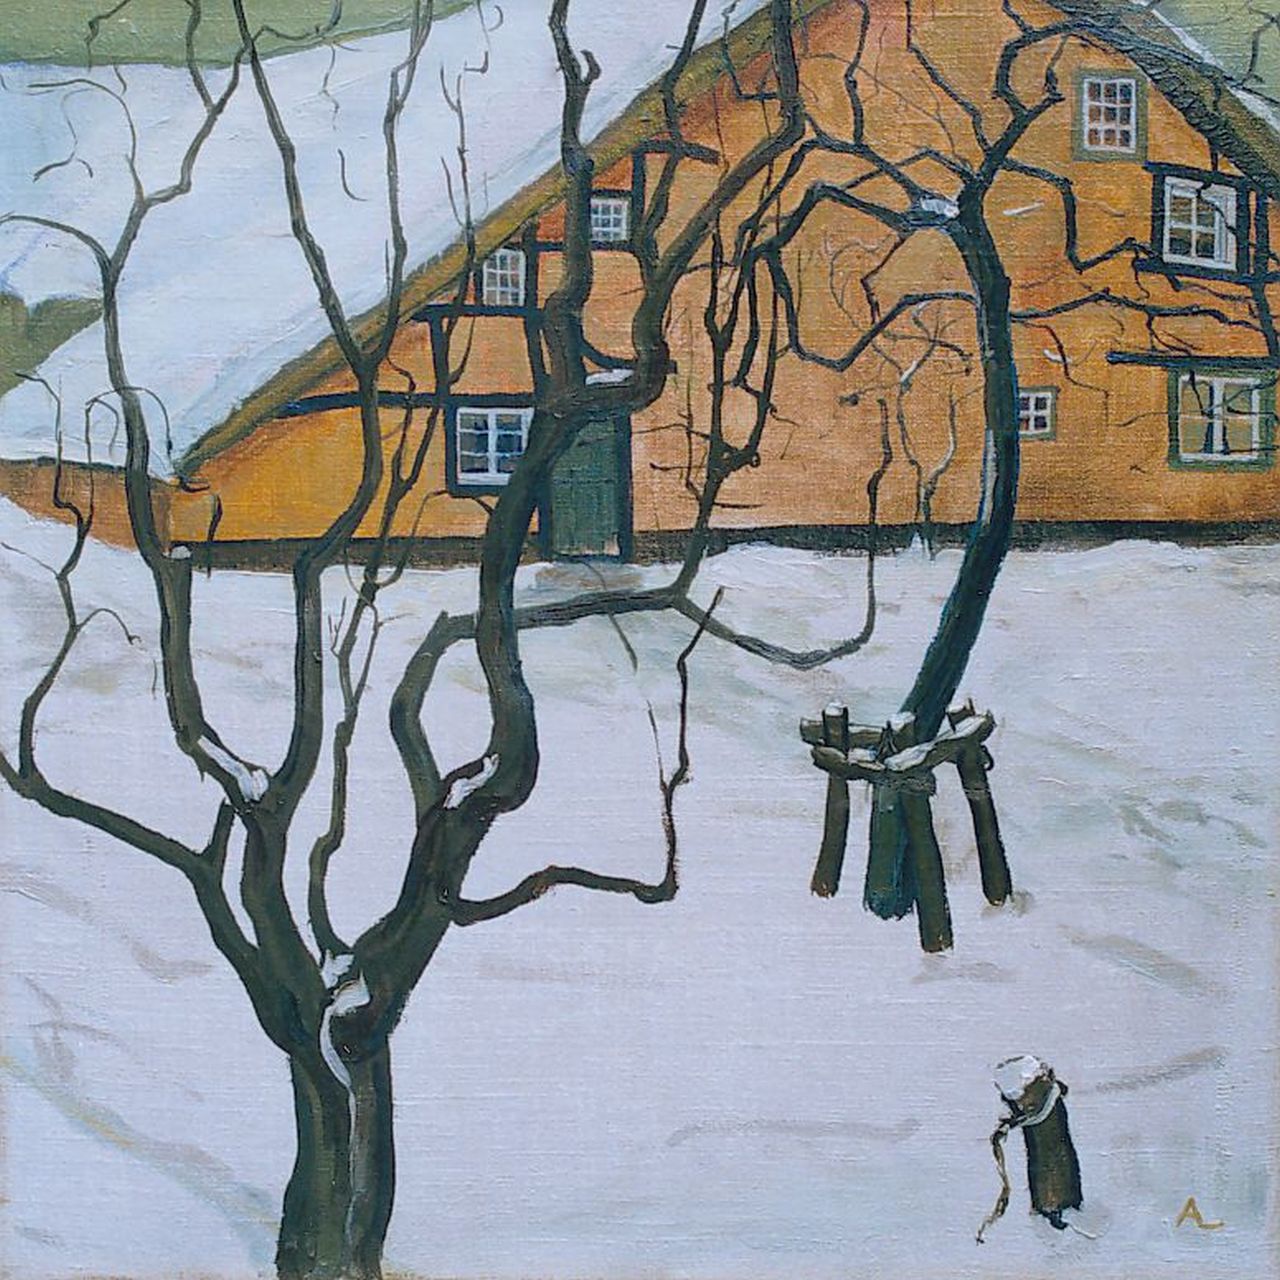 Leeflang A.  | Arie Leeflang, A farm in a winter landscape, Öl auf Leinwand 50,8 x 50,6 cm, signed l.r. with monogram